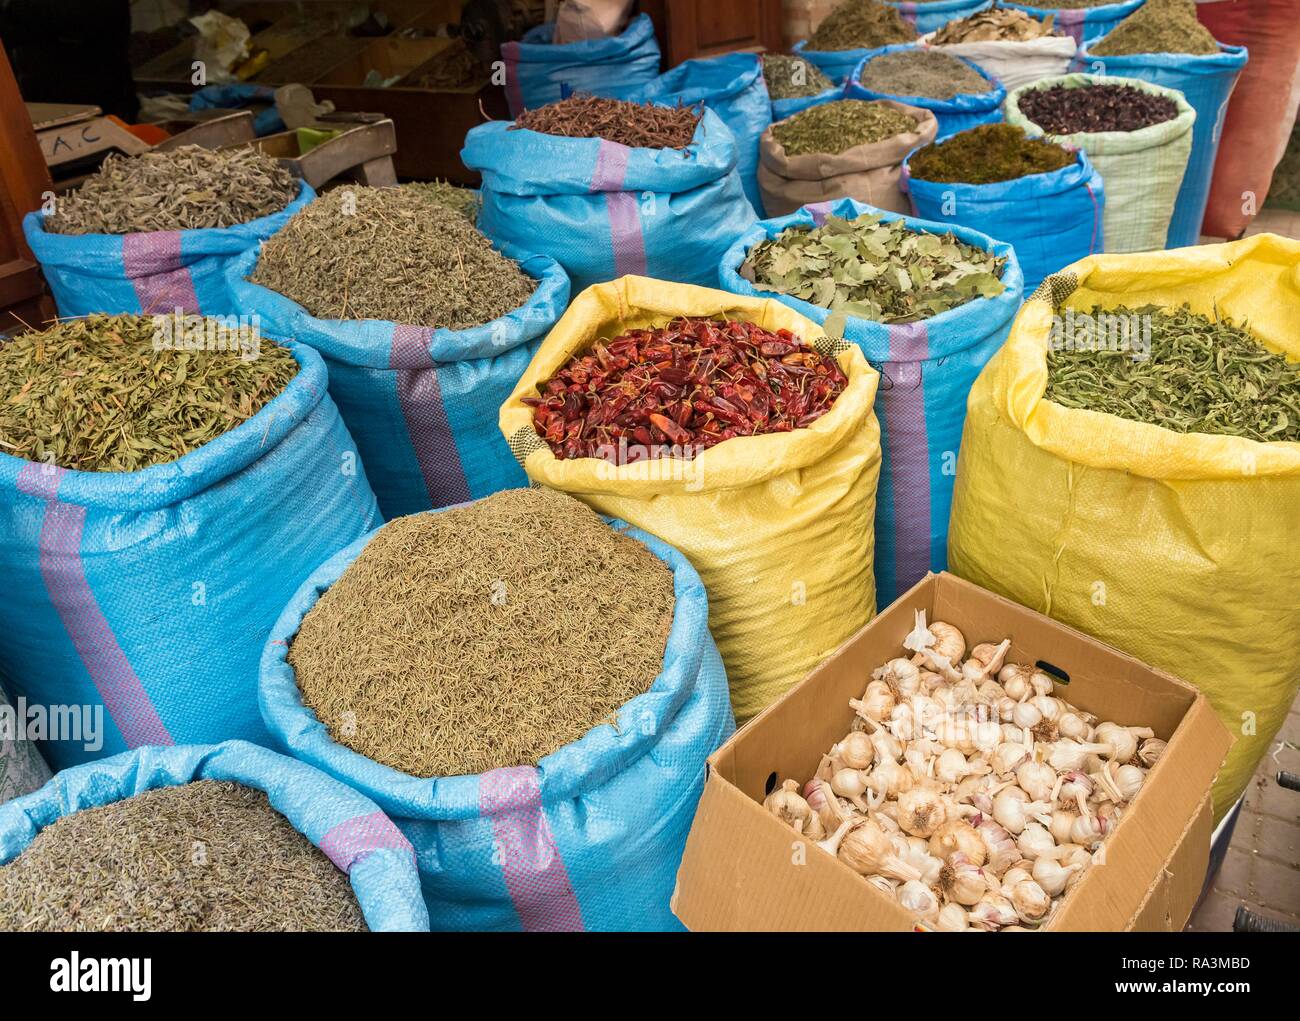 Sacks of dried spices and herbs in Marrakech spice market, Marrakech, Morocco Stock Photo